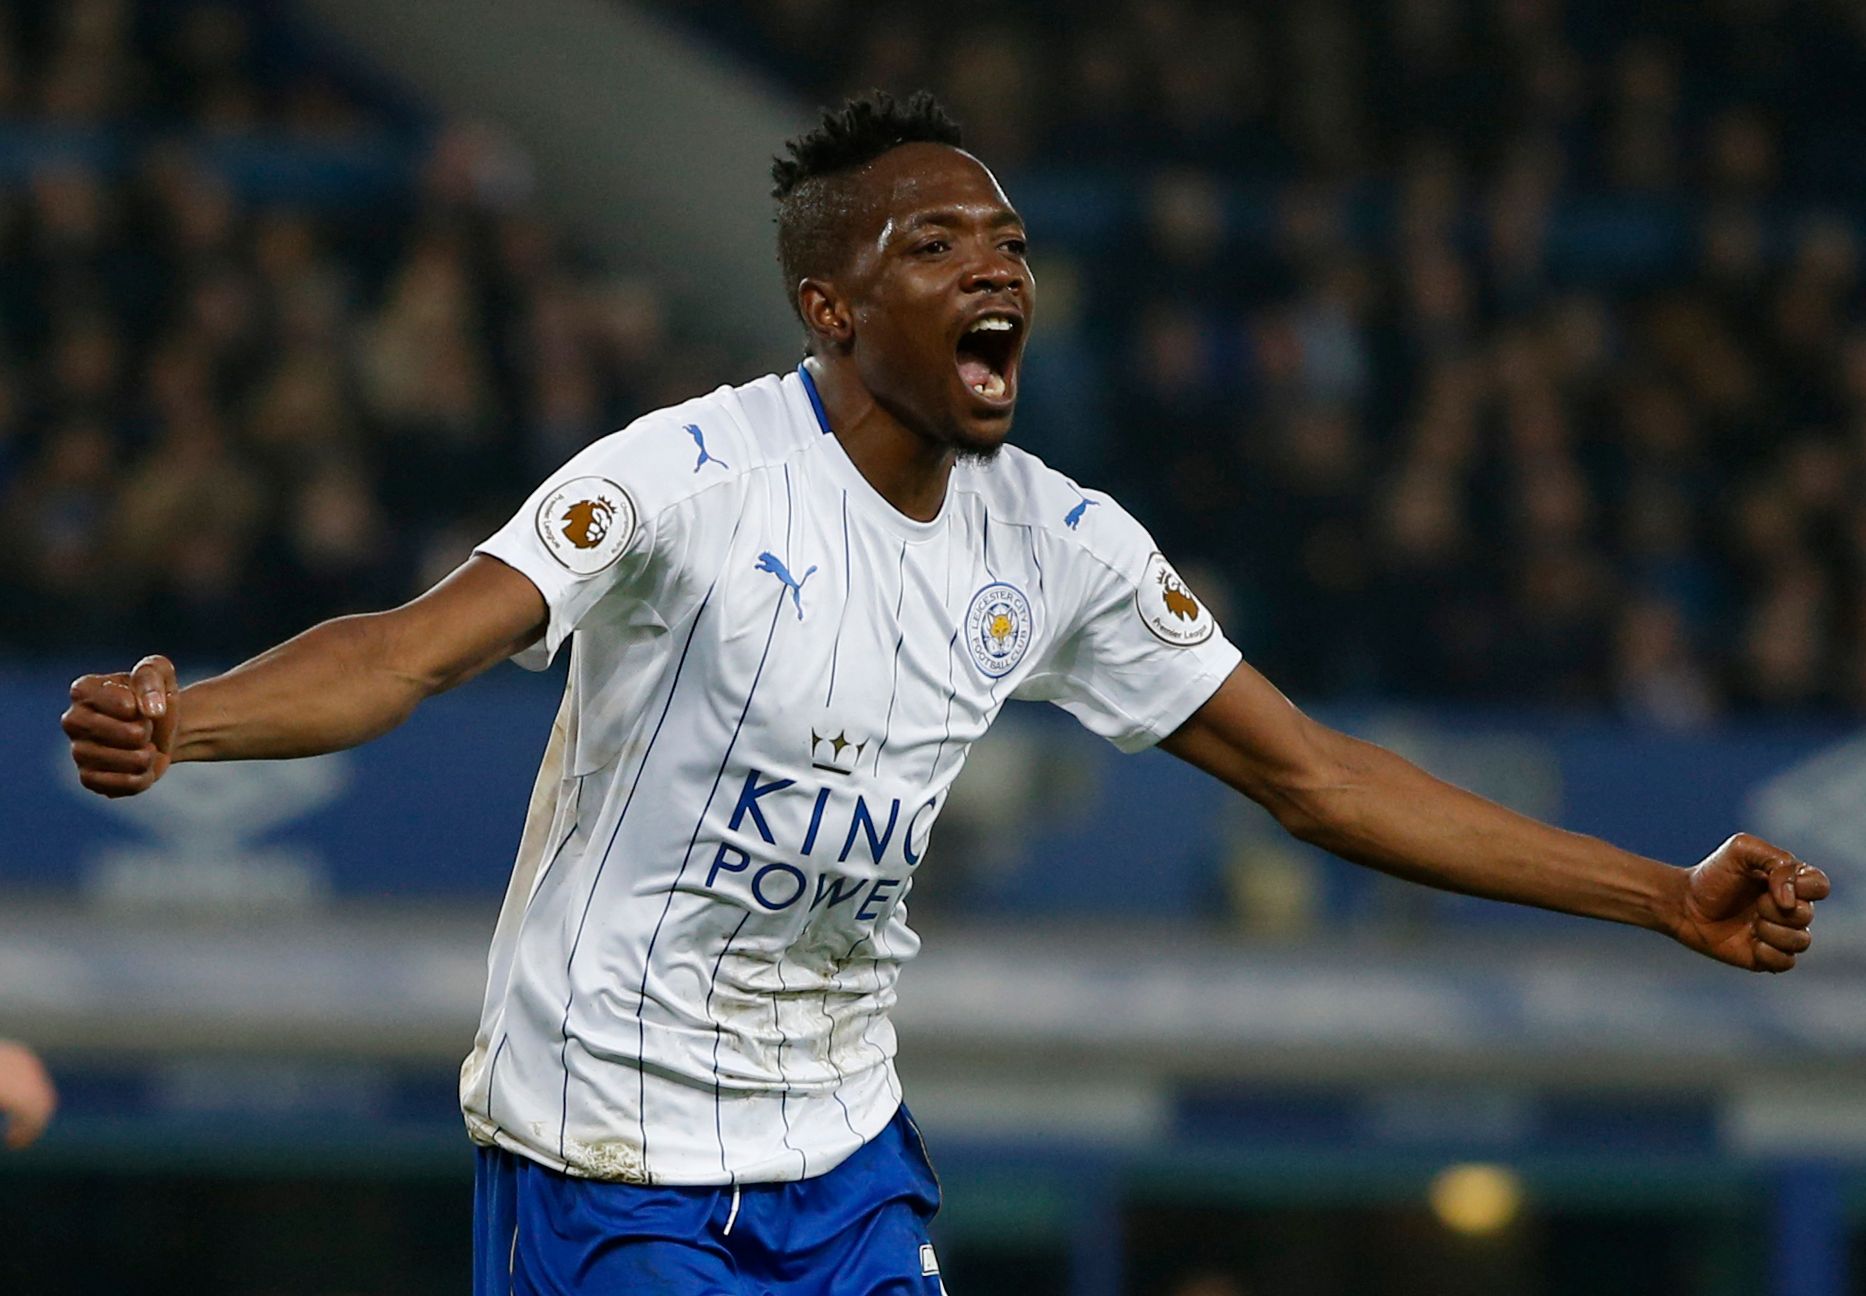 Britain Football Soccer - Everton v Leicester City - FA Cup Third Round - Goodison Park - 7/1/17 Leicester City's Ahmed Musa celebrates scoring their first goal  Action Images via Reuters / Ed Sykes Livepic EDITORIAL USE ONLY. No use with unauthorized audio, video, data, fixture lists, club/league logos or 